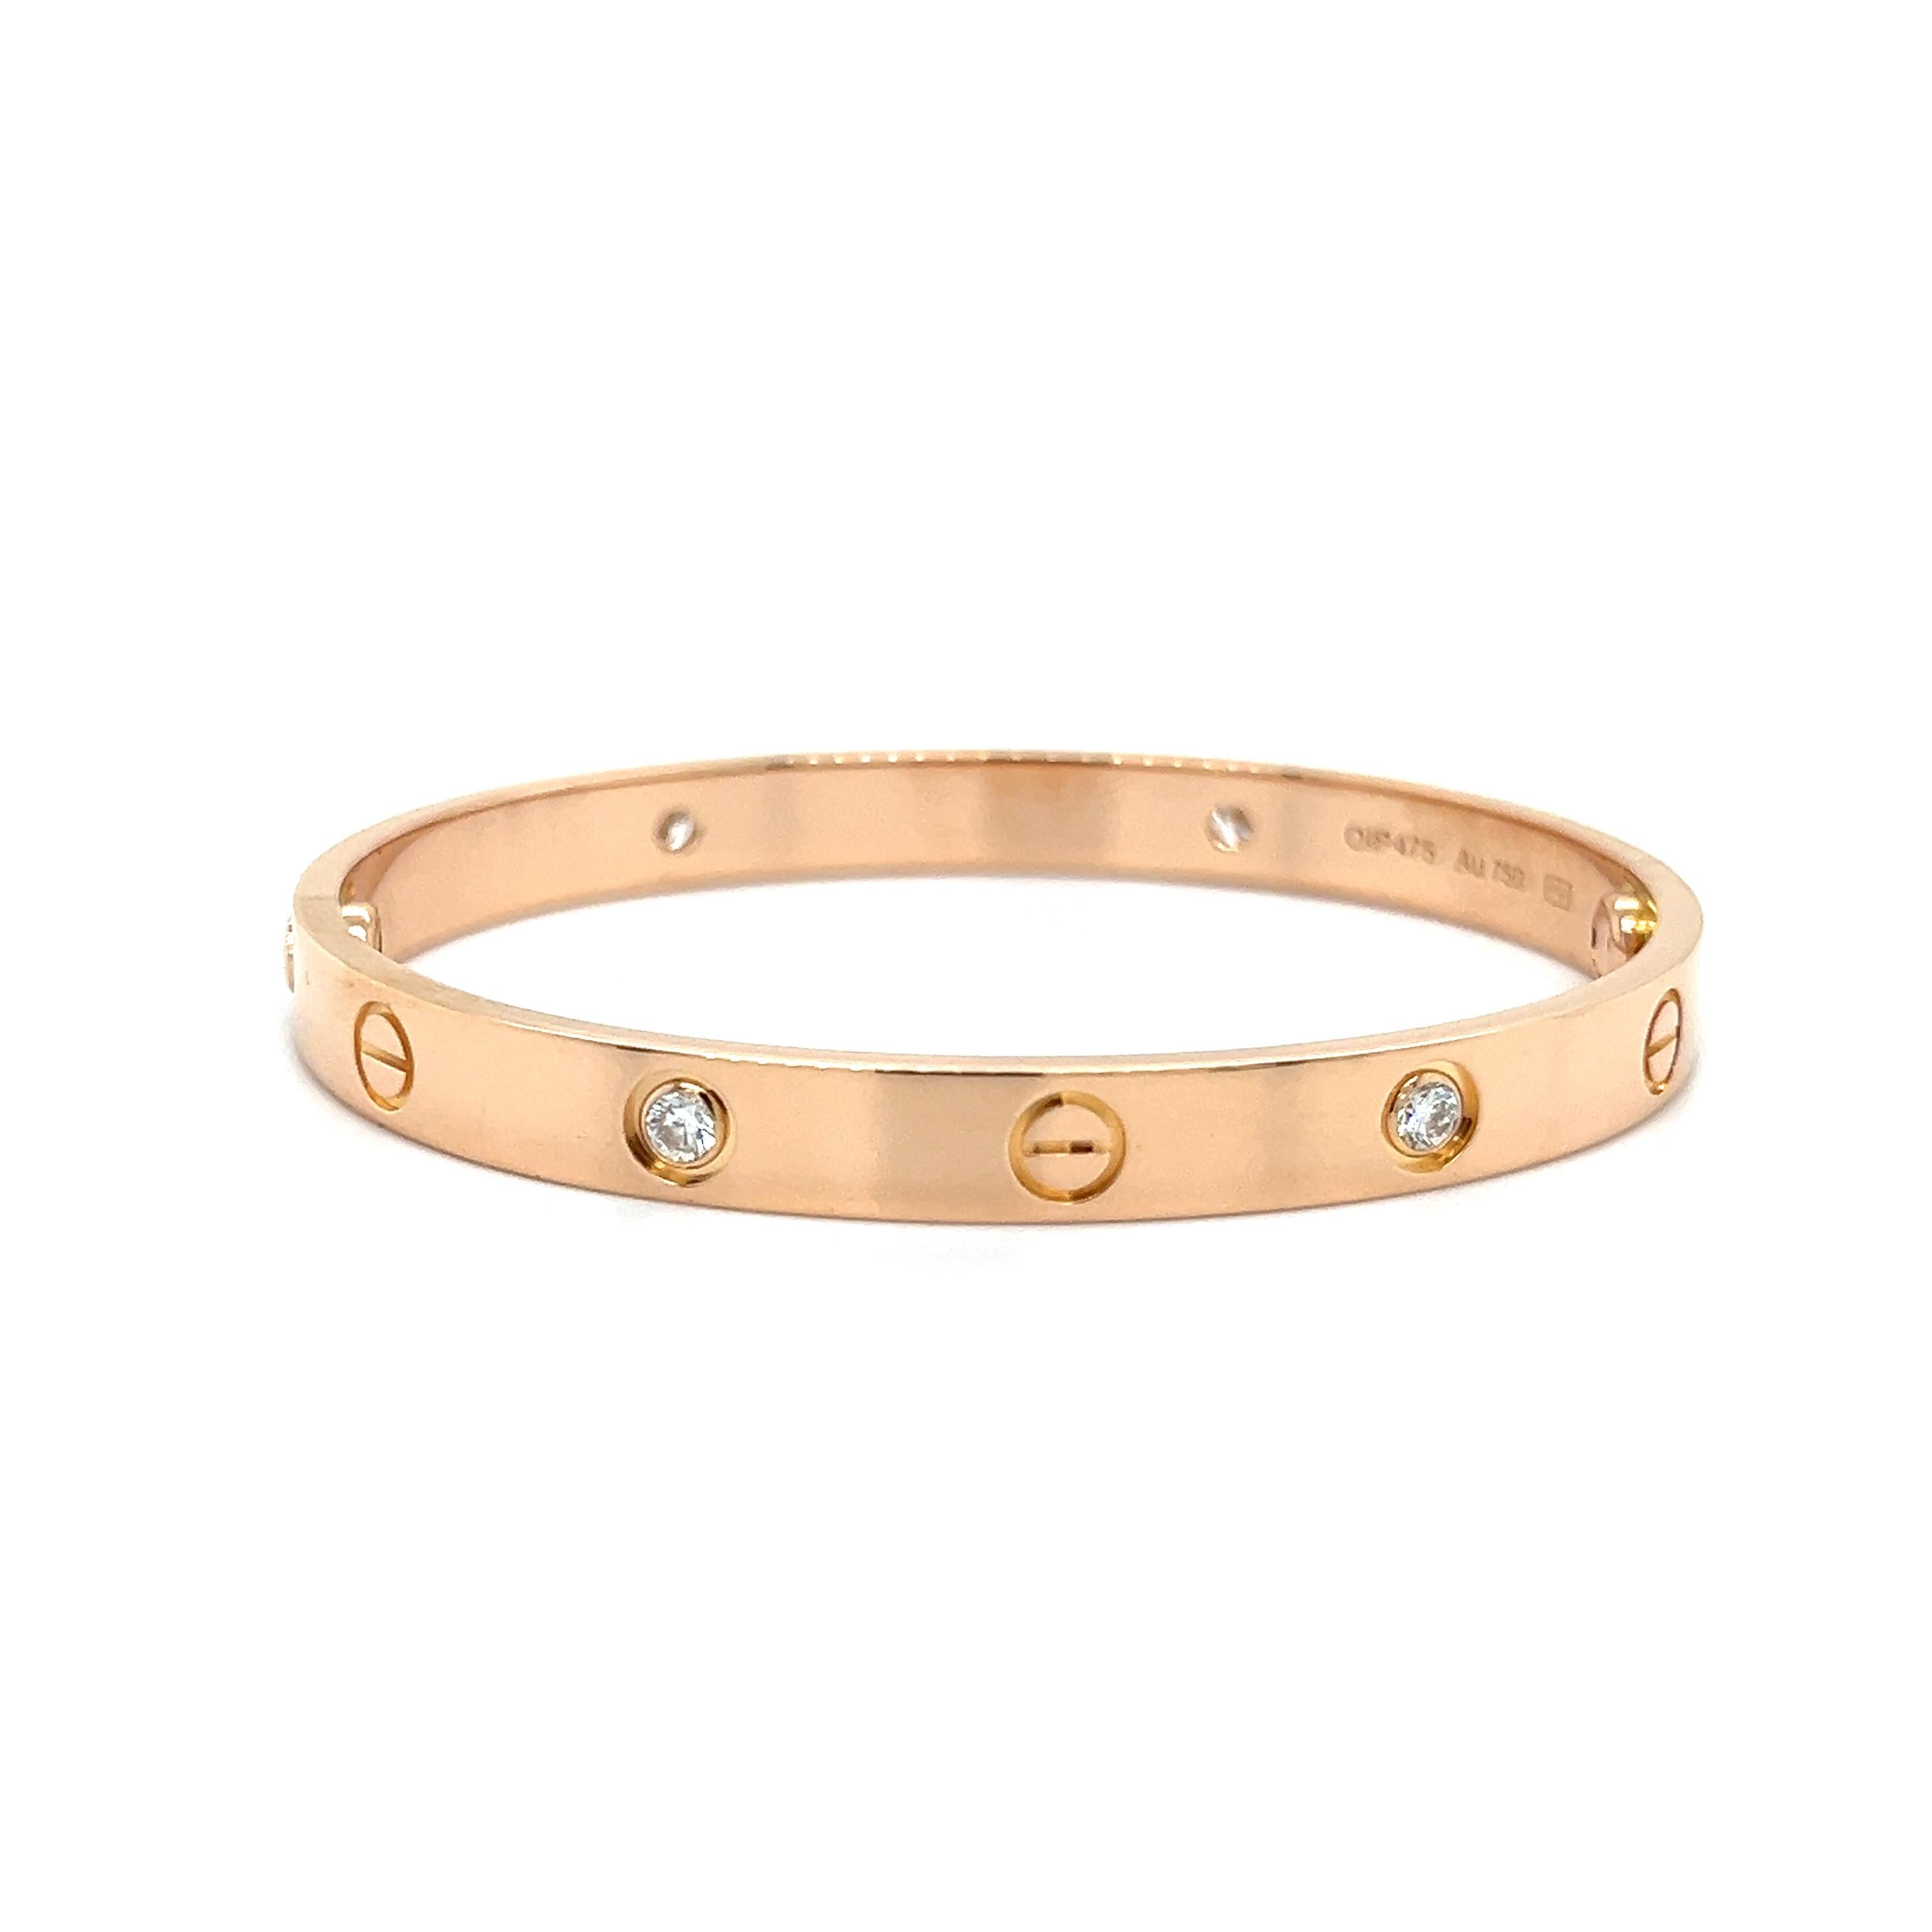 Love collection bracelets are surrounded with lore. As the story goes, they could at first only be purchased by couples who would surrender the screwdrivers to one another. When Cartier introduced the bracelet, they further cemented its romantic